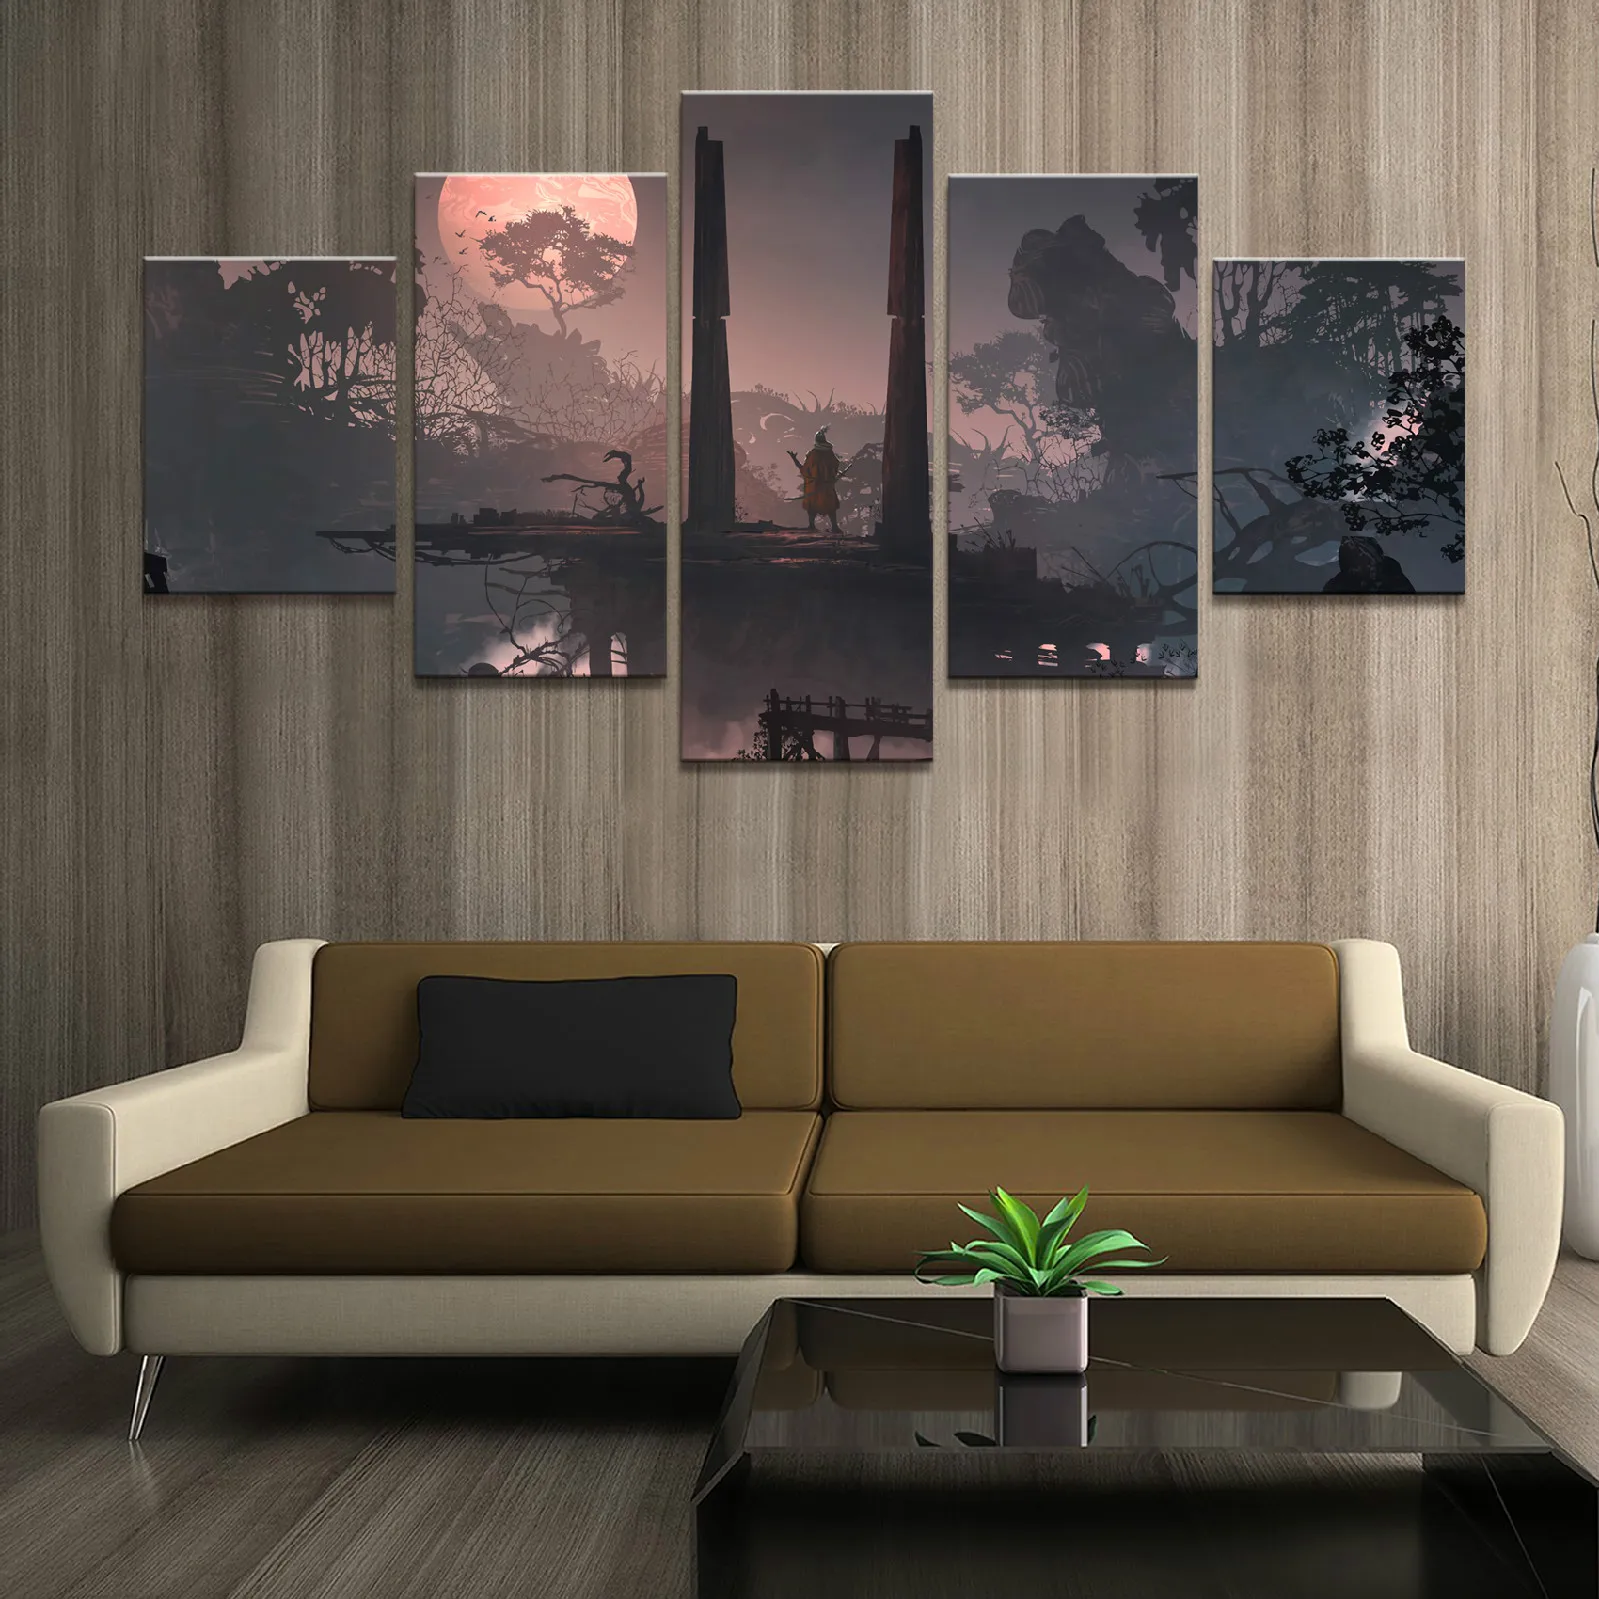 

5 Piece SEKIRO Shadows Die Twice Games Art Print Canvas Paintings Picture Wall Paintings for Home Decor1